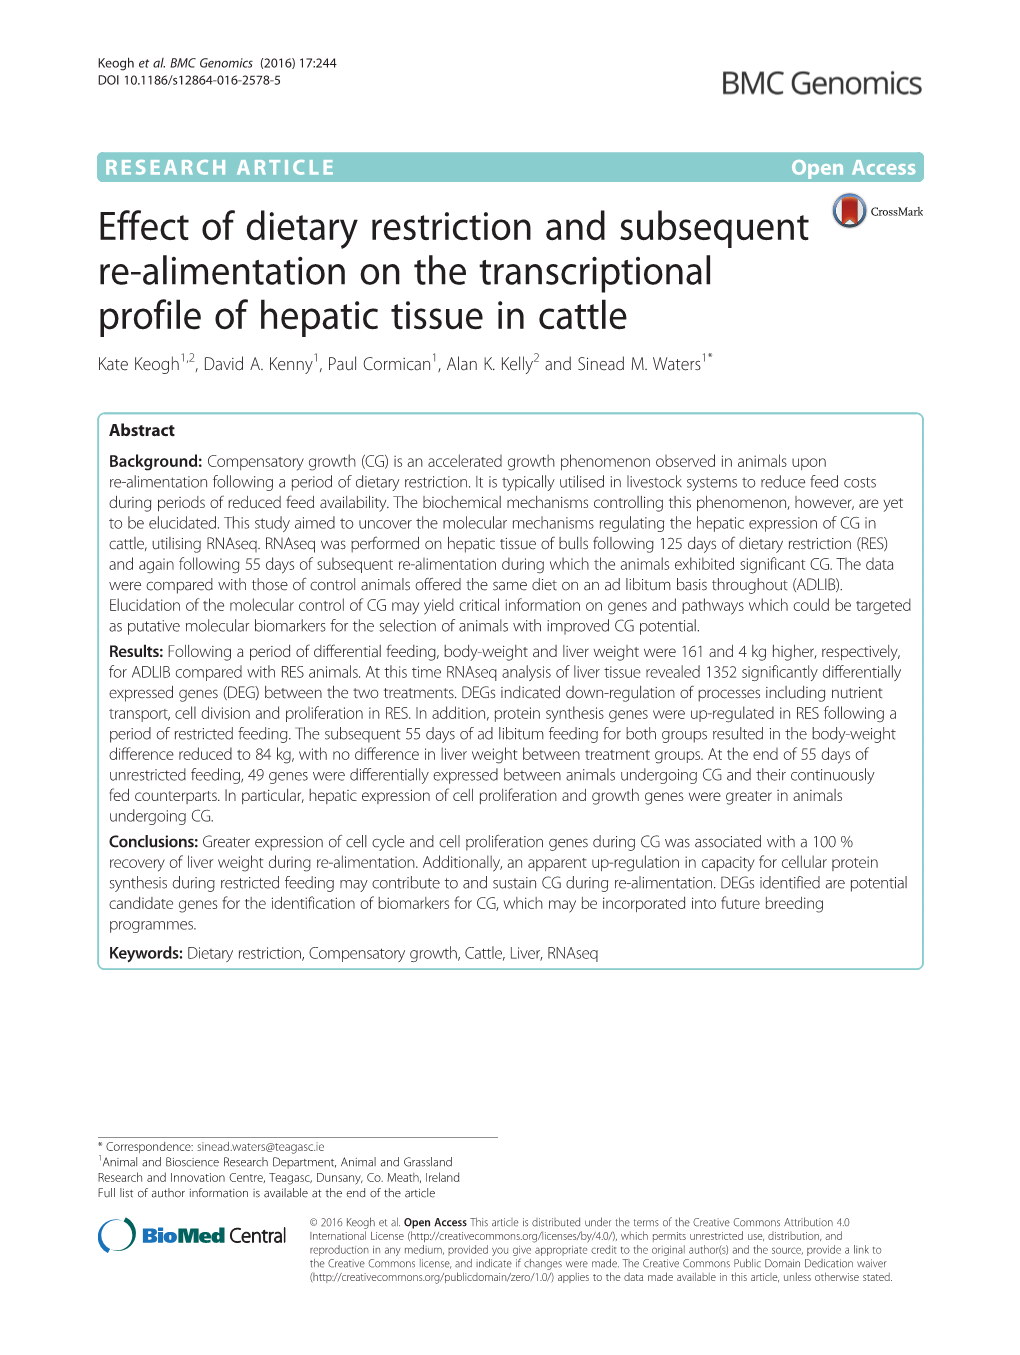 Effect of Dietary Restriction and Subsequent Re-Alimentation on the Transcriptional Profile of Hepatic Tissue in Cattle Kate Keogh1,2, David A